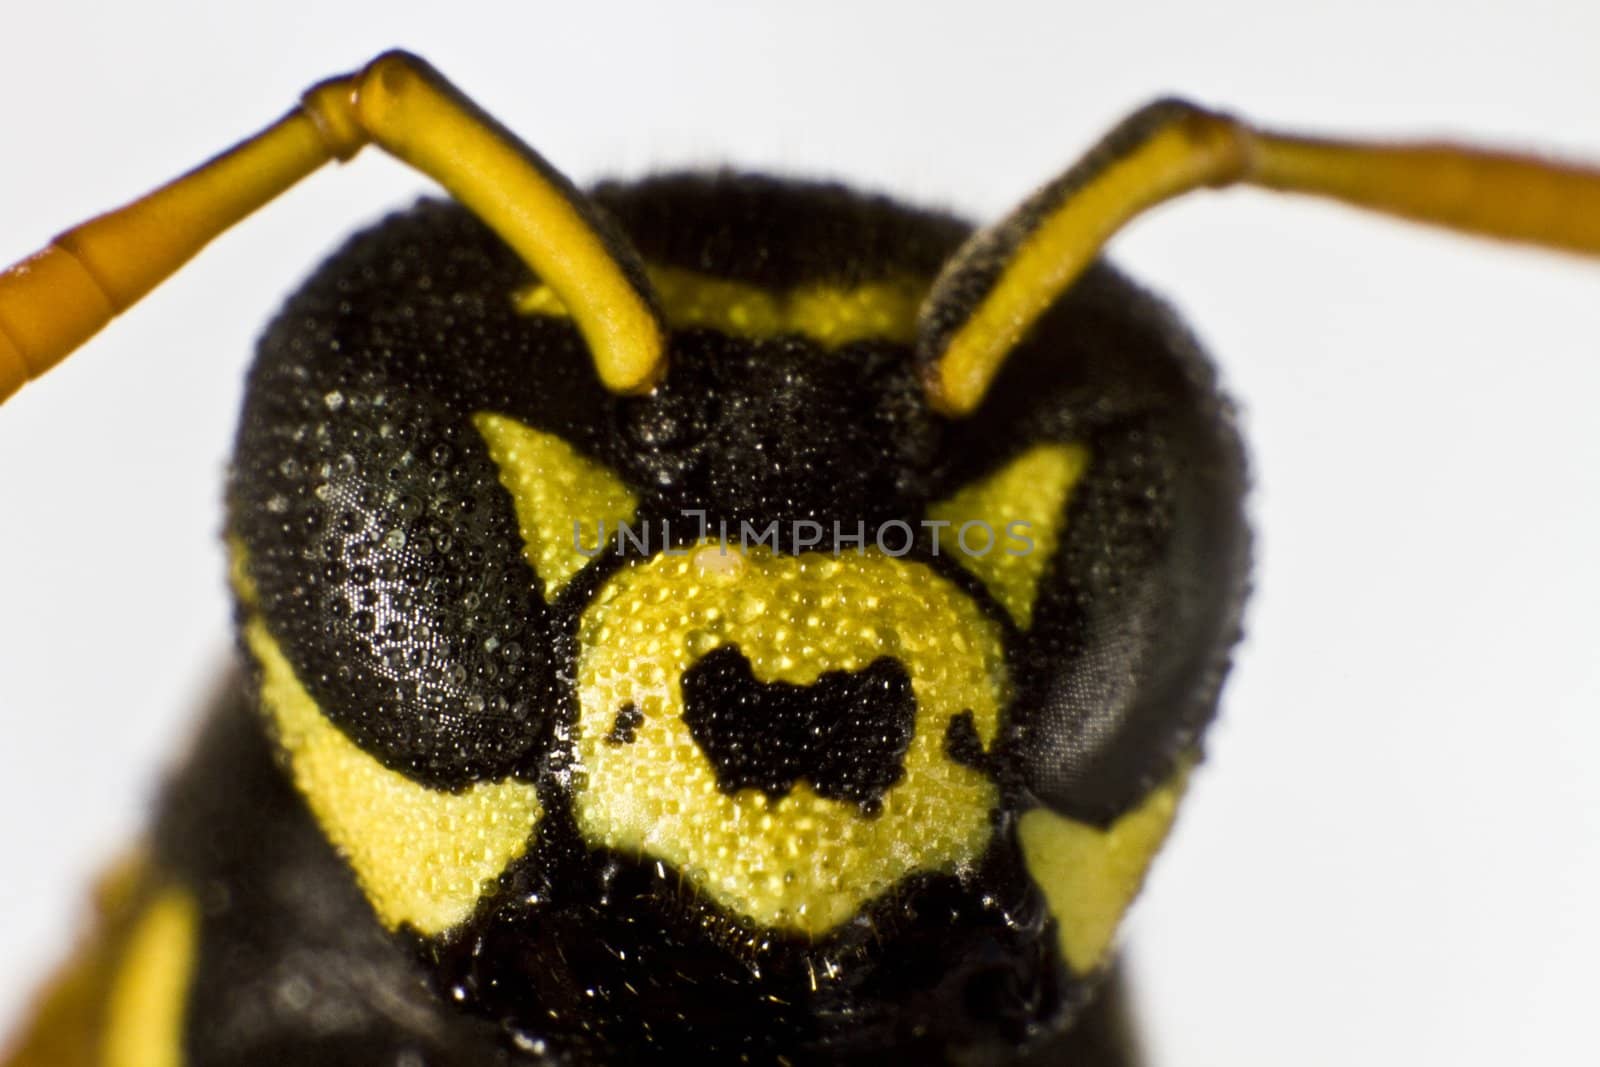 wet wasp in close up shot from front